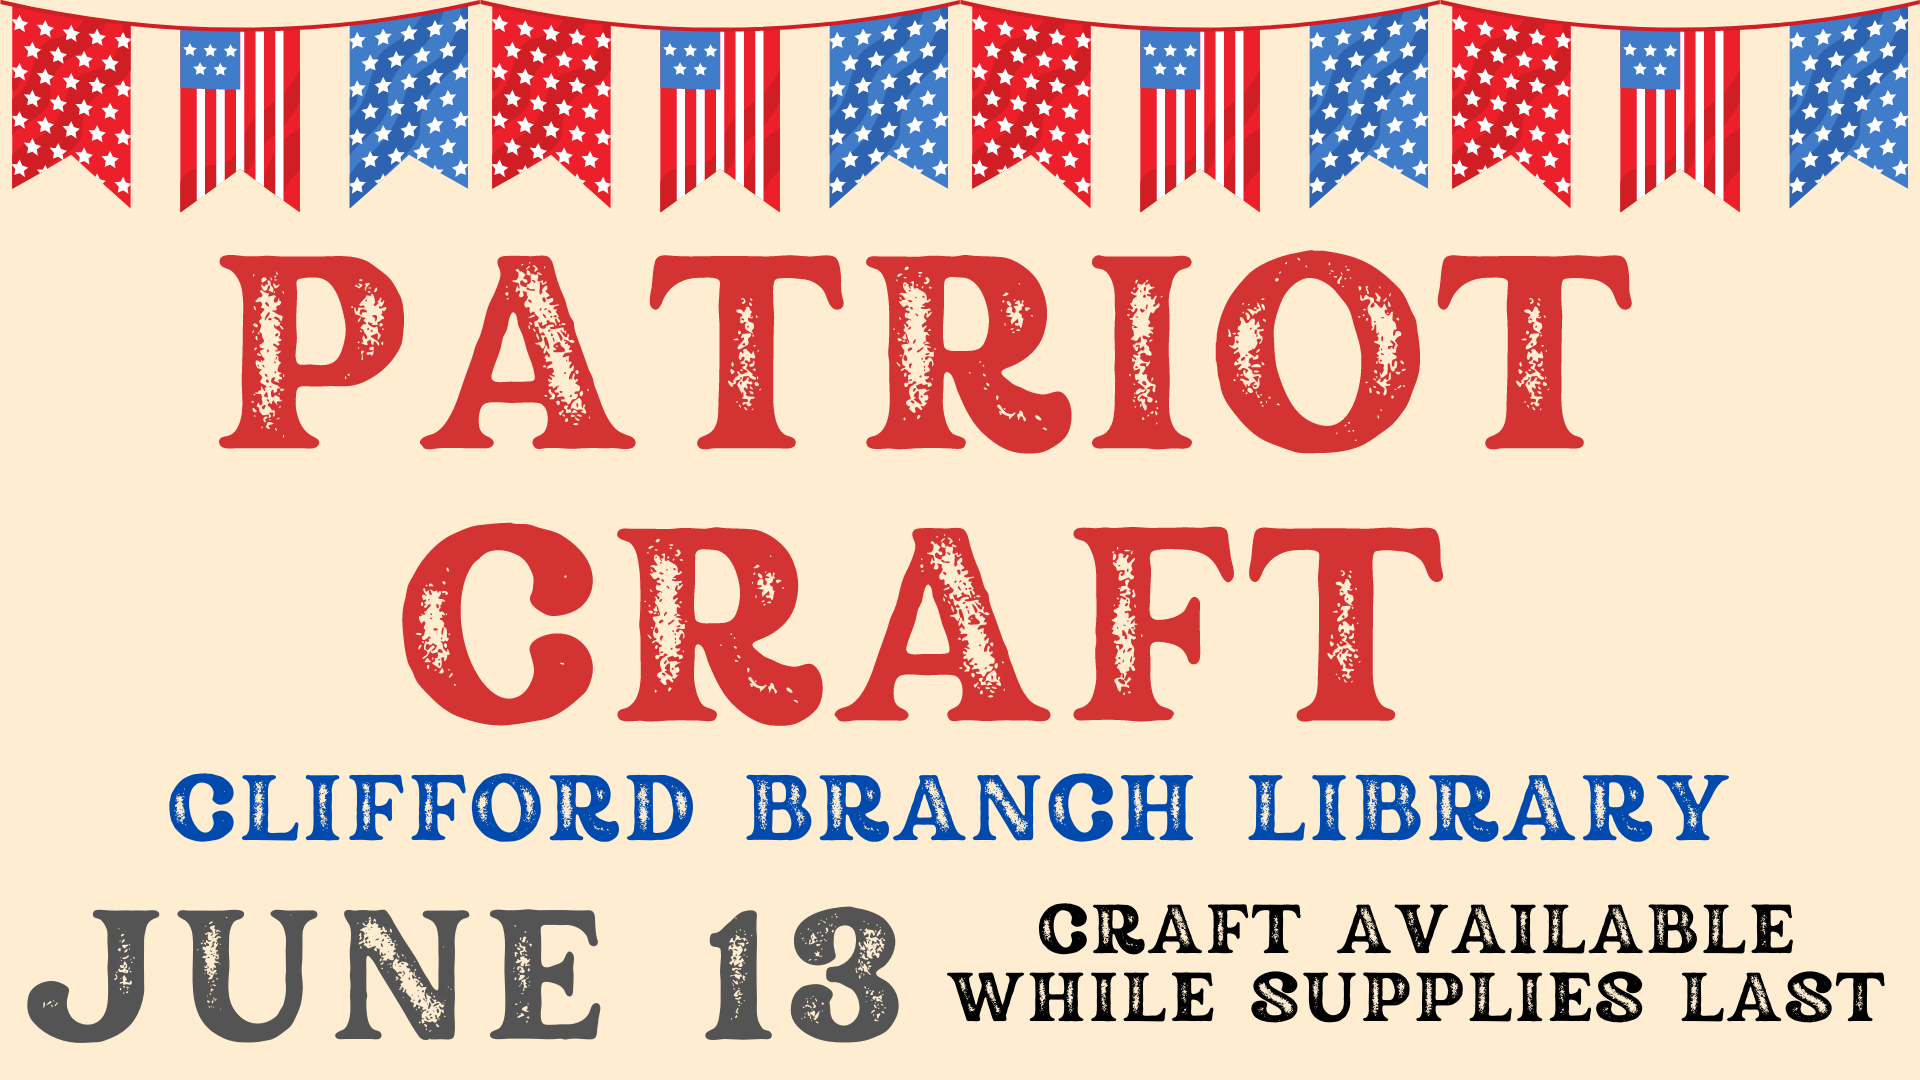 Patriot Craft June 13 Craft Available while supplies last 